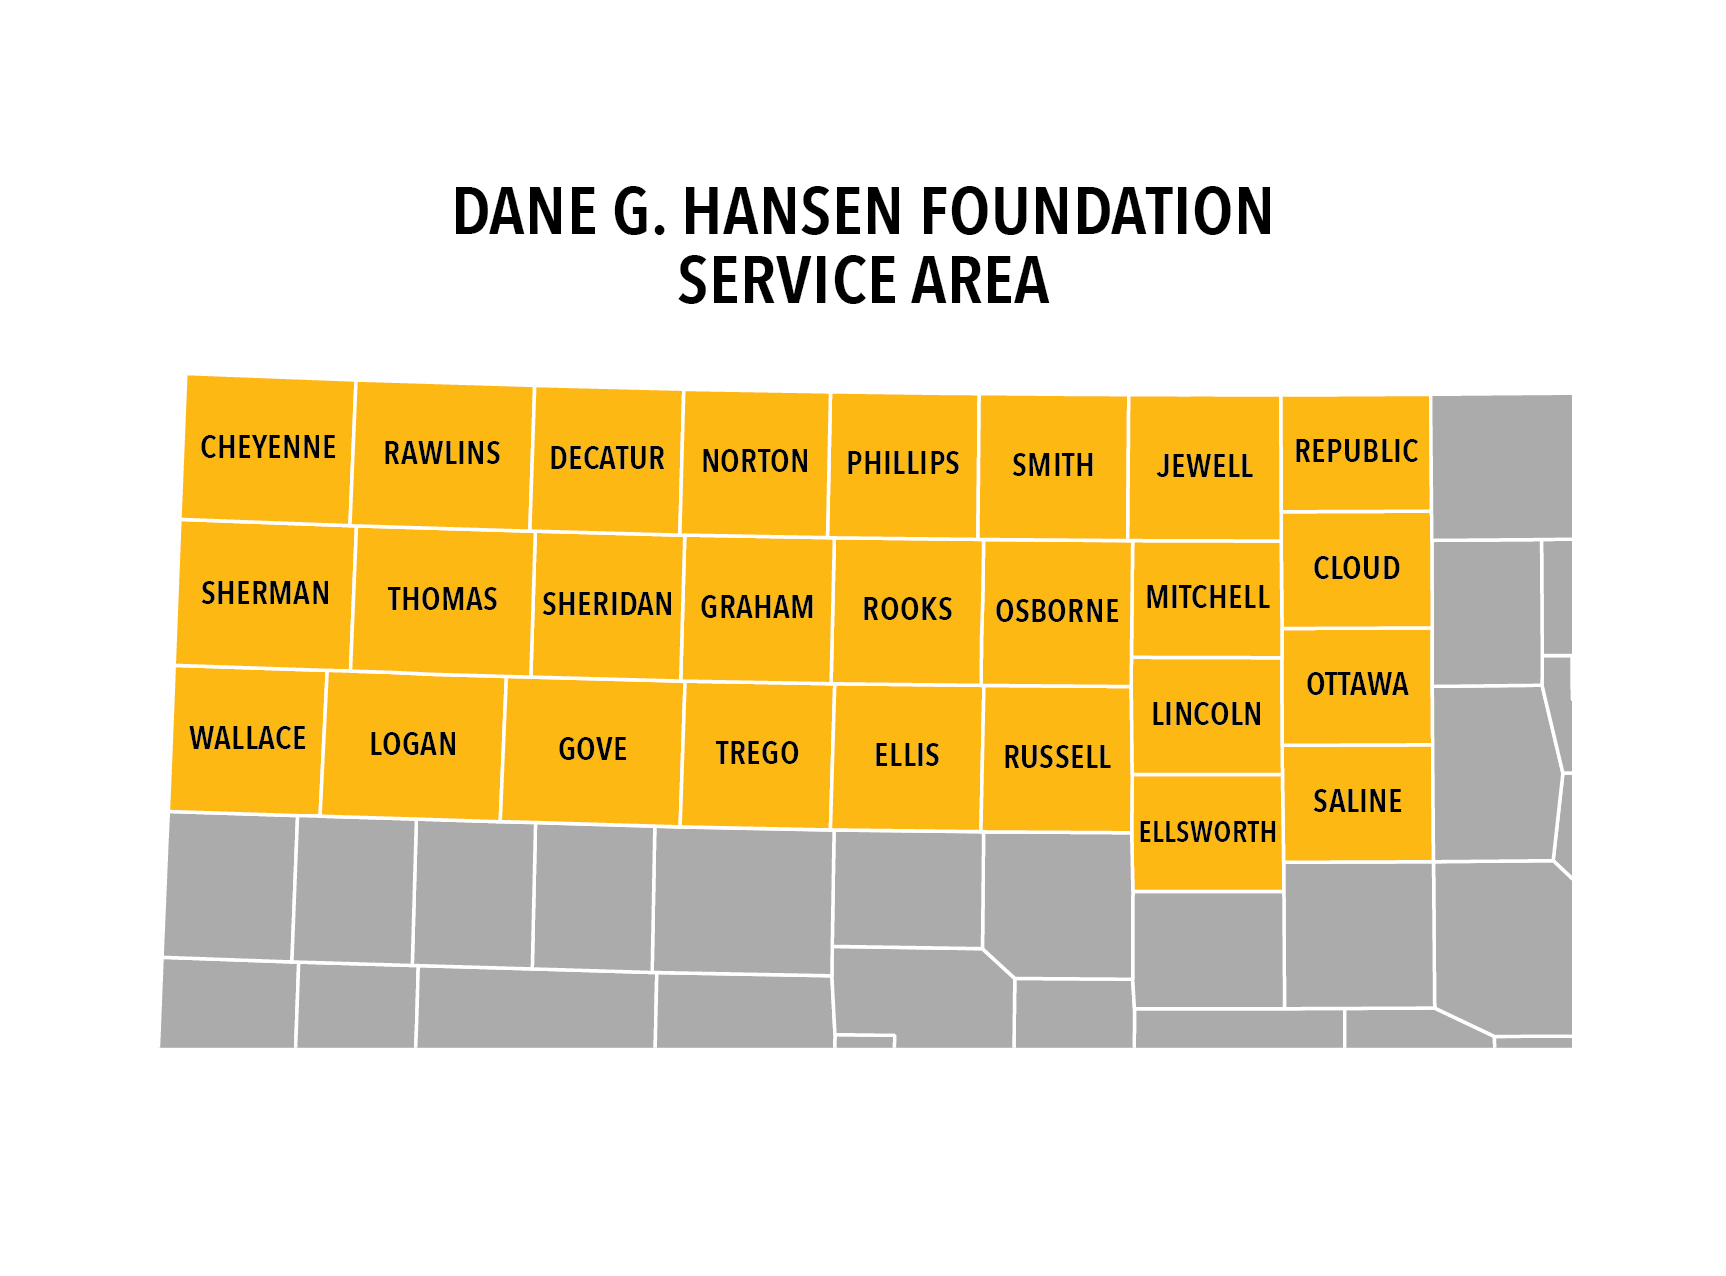 Employers must come from the Dane G. Hansen Foundation Service area.